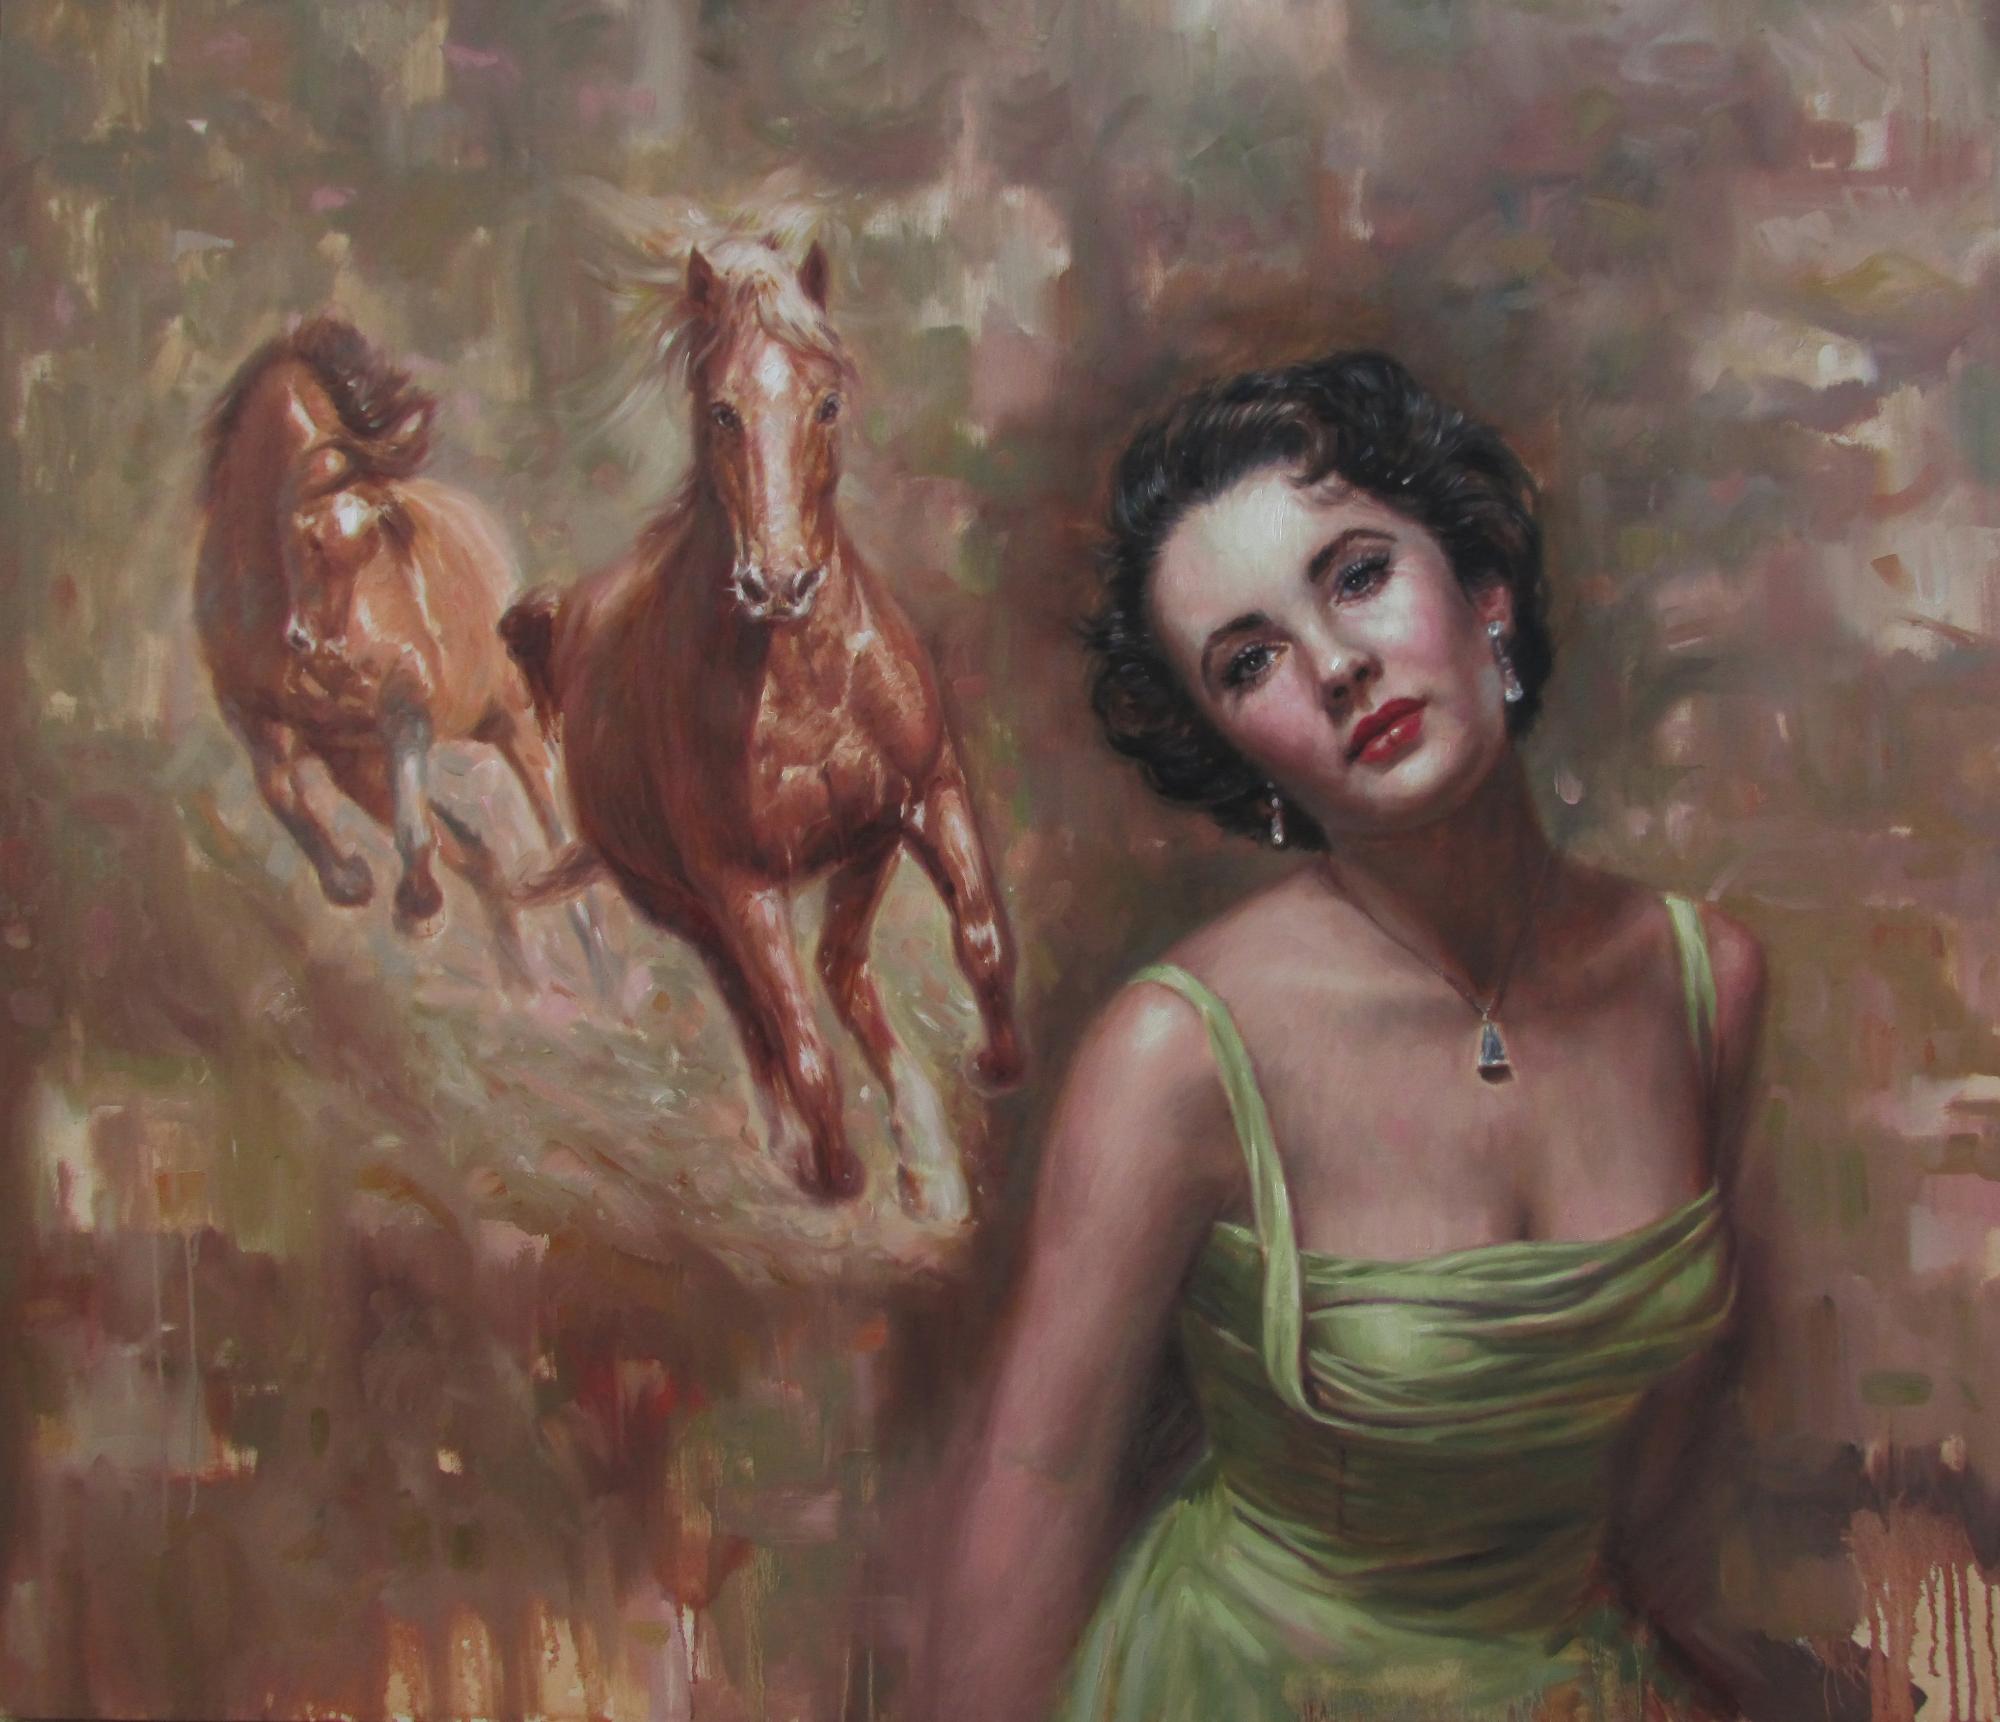 Gallopando-Galloping Cuban Figurative  Young Liz Taylor  Horses Giant Marfa Oil  - Impressionist Painting by  ANDRES  RETAMERO VALENZUELA 